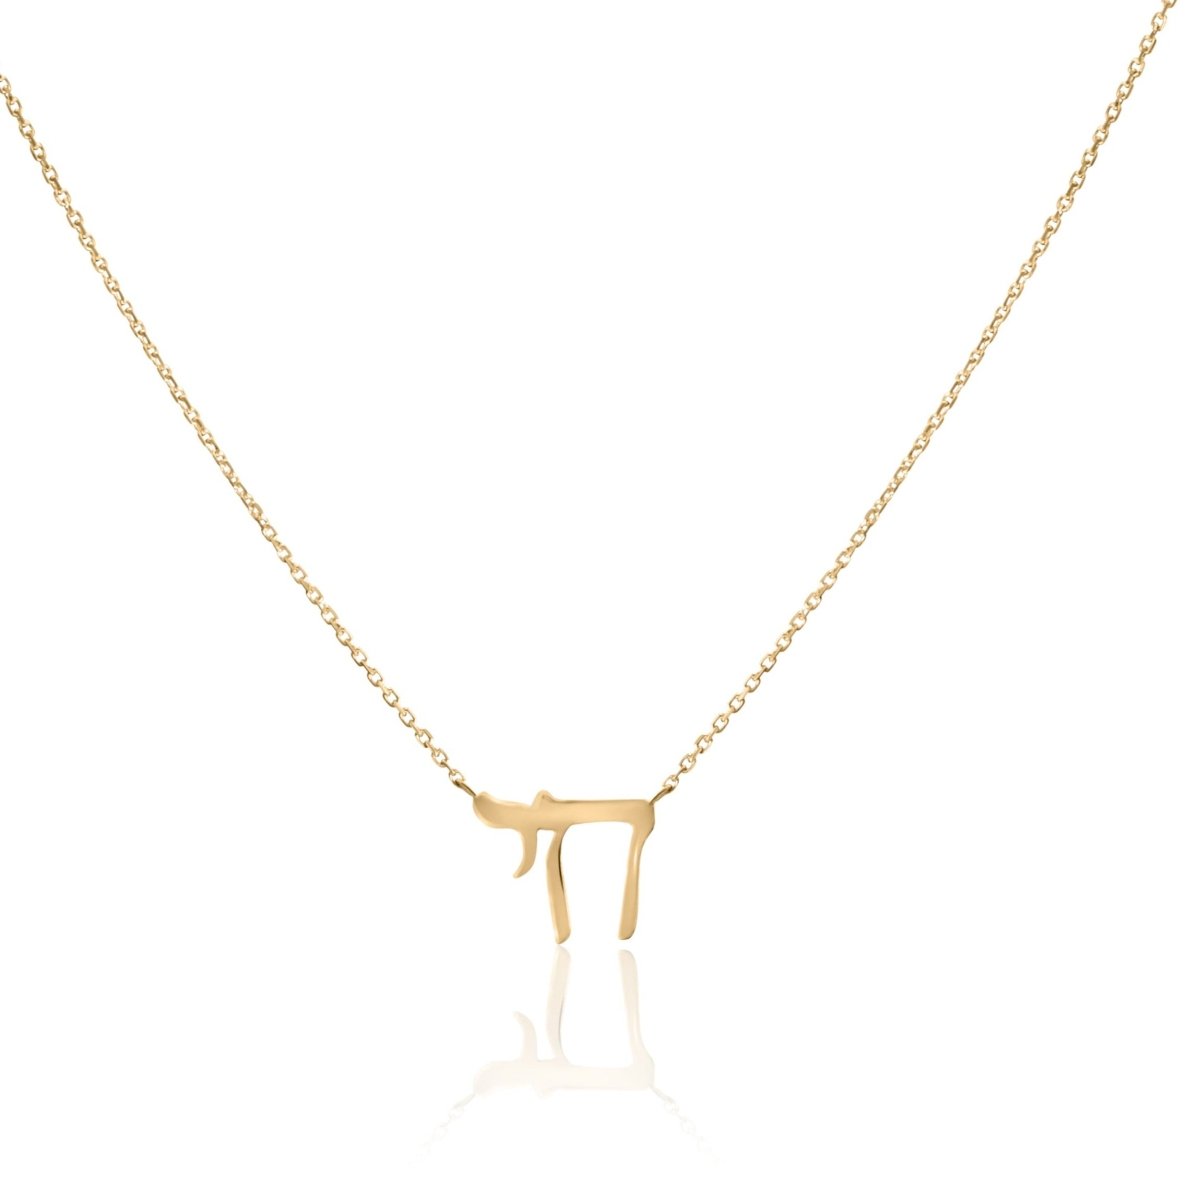 Am Israel Chai Hebrew Necklace in 14k Gold